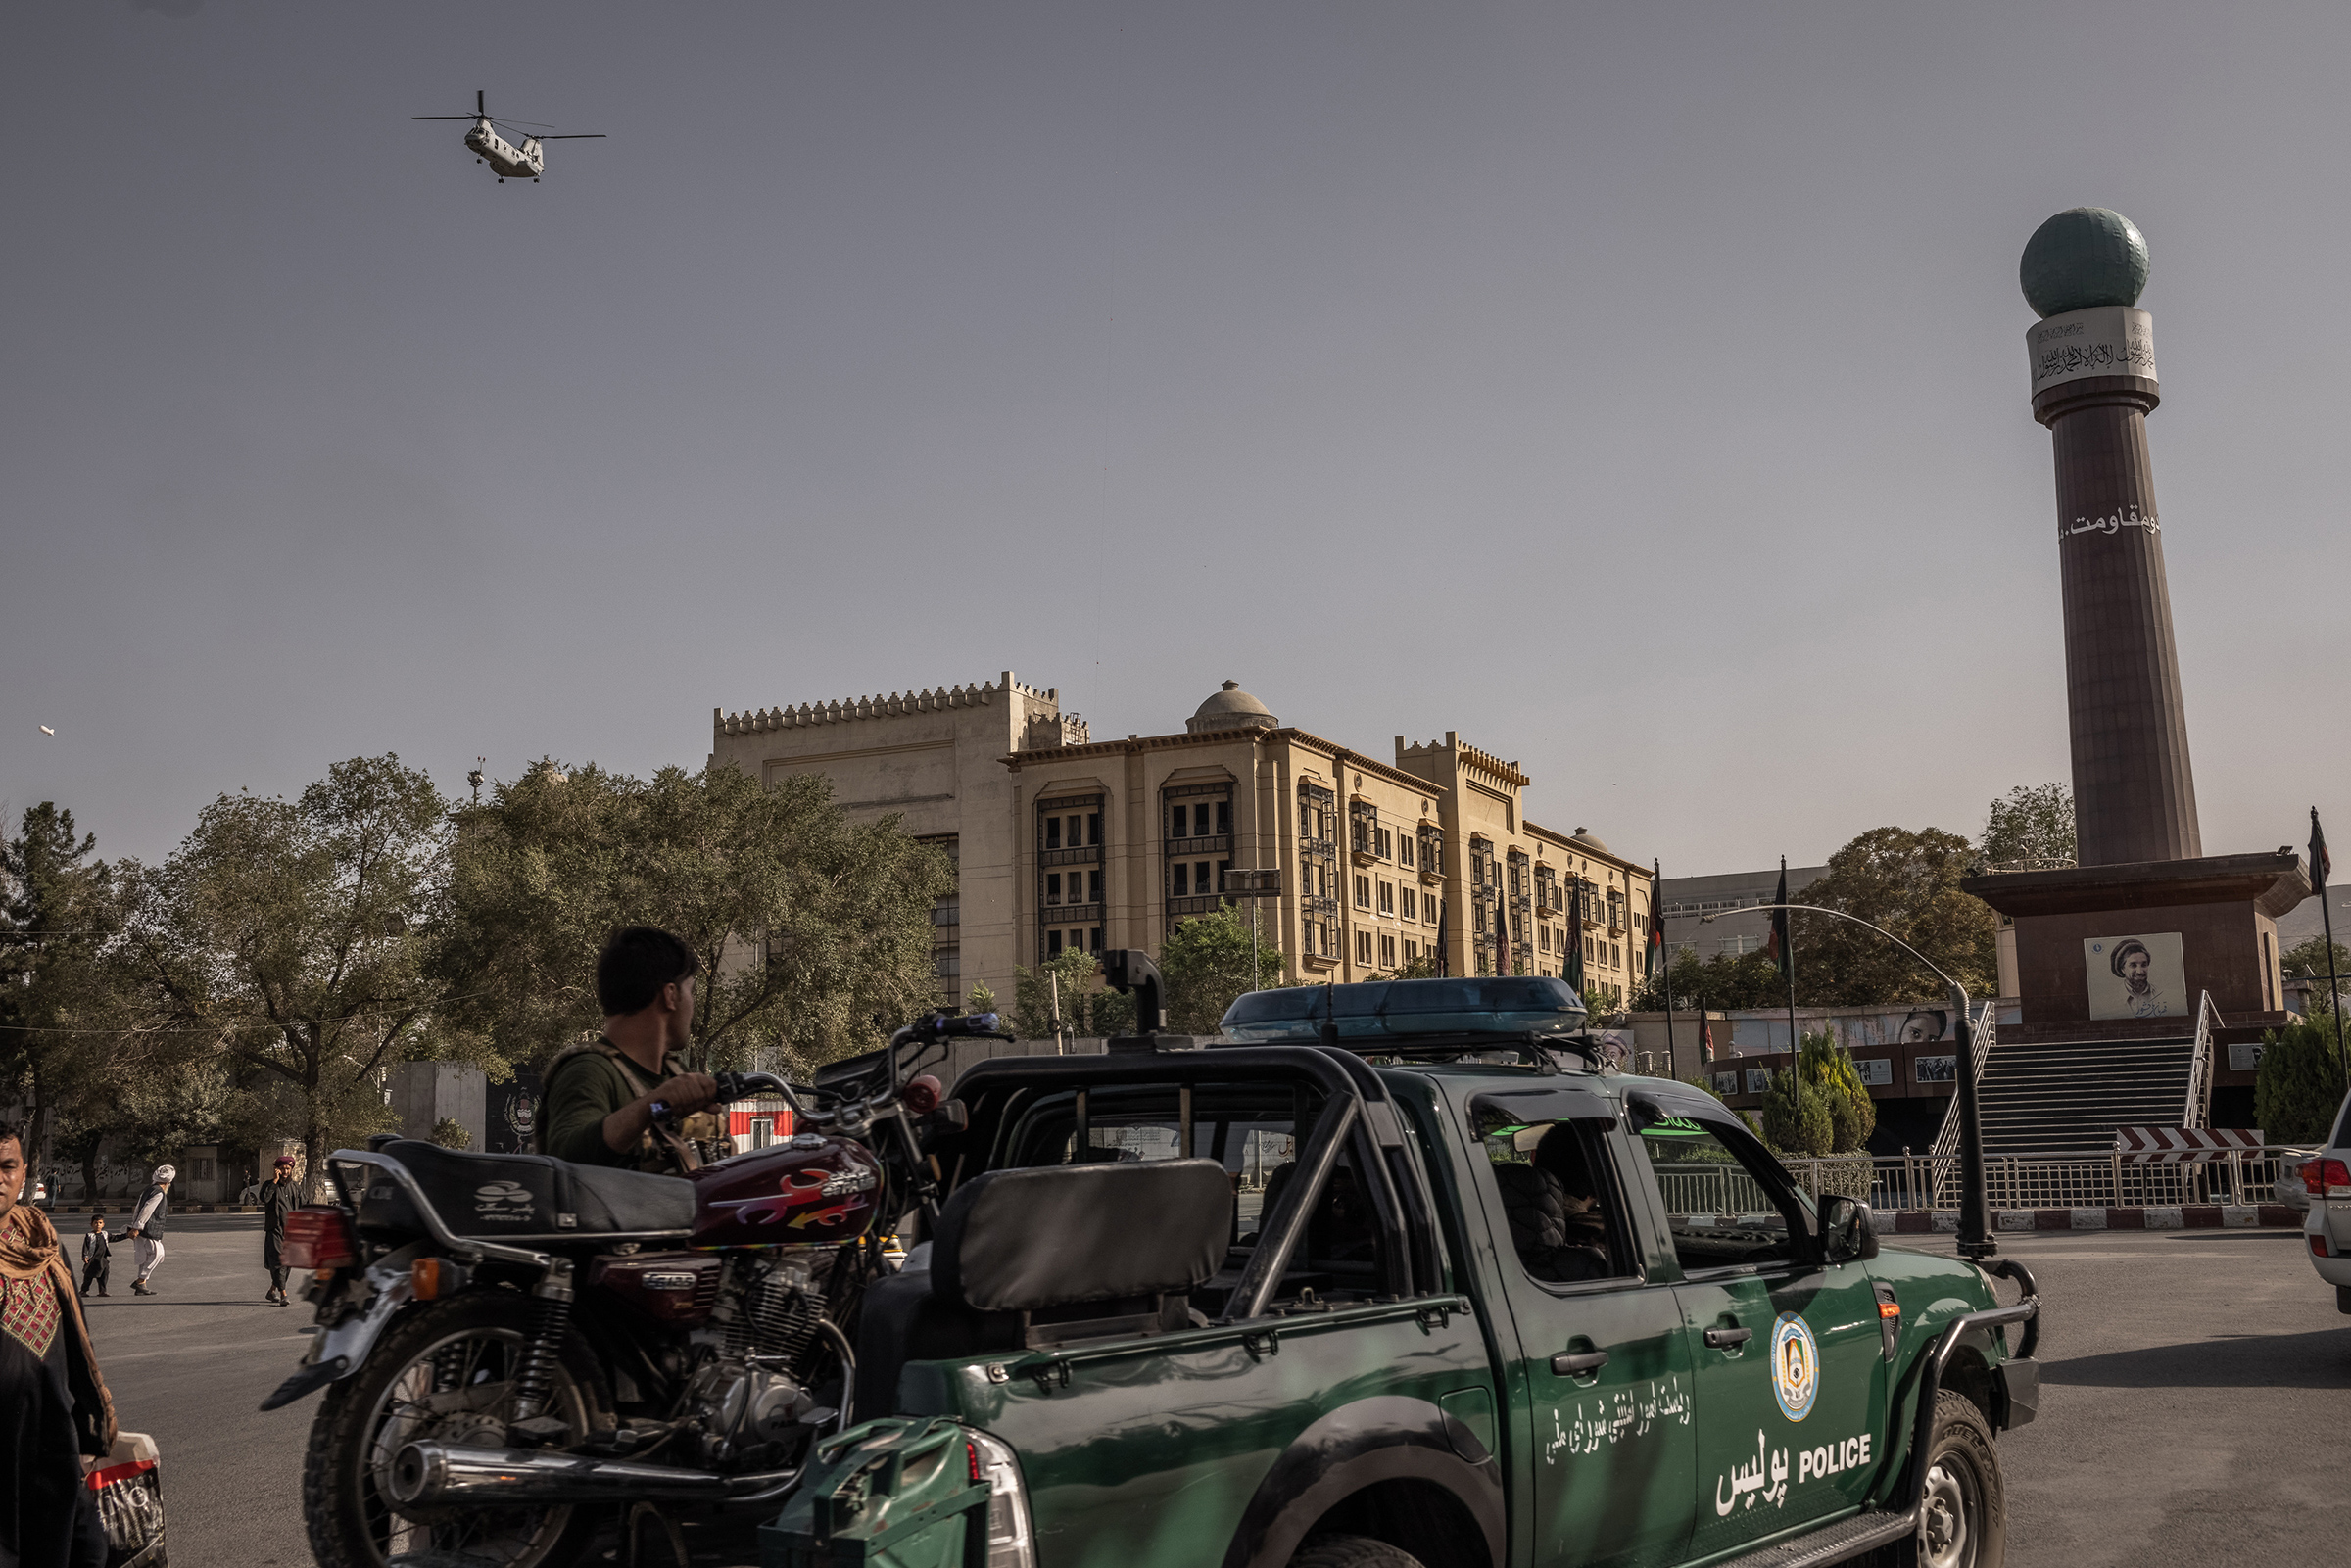 A helicopter leaves from the U.S. Embassy ahead of the Taliban's arrival in Kabul on Aug. 15, 2021.